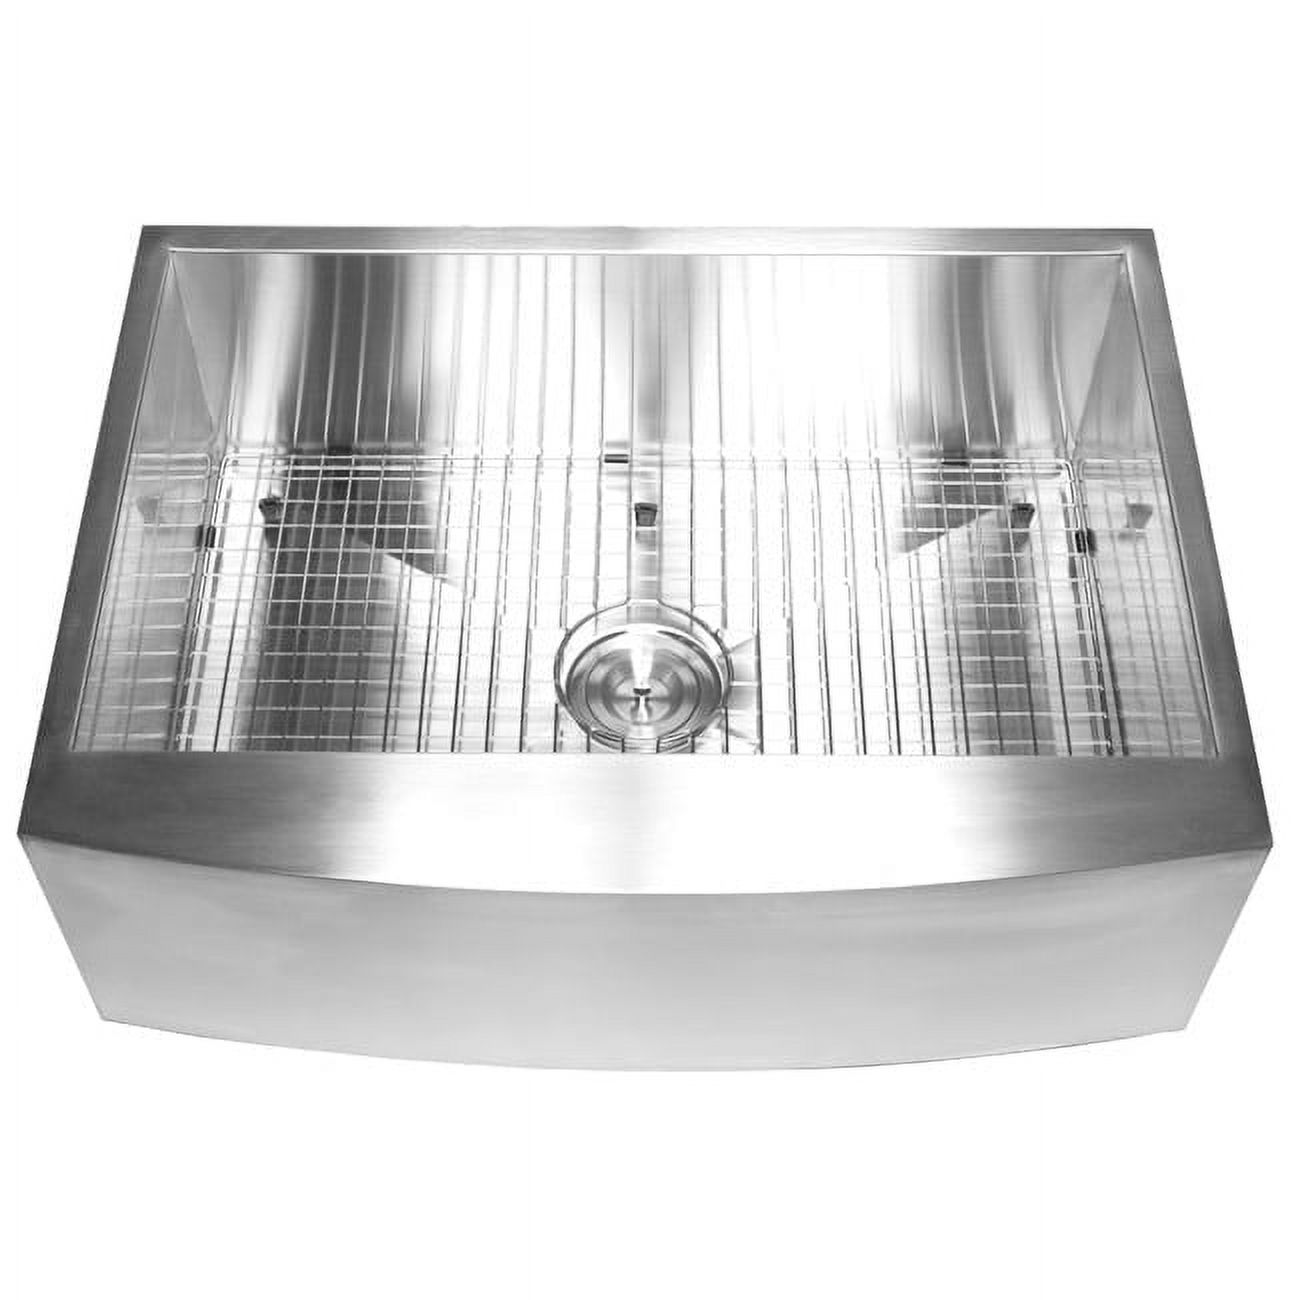 Contempo Living Inc 30-inch Stainless Steel Farmhouse Single Bowl Kitchen Sink - image 4 of 5